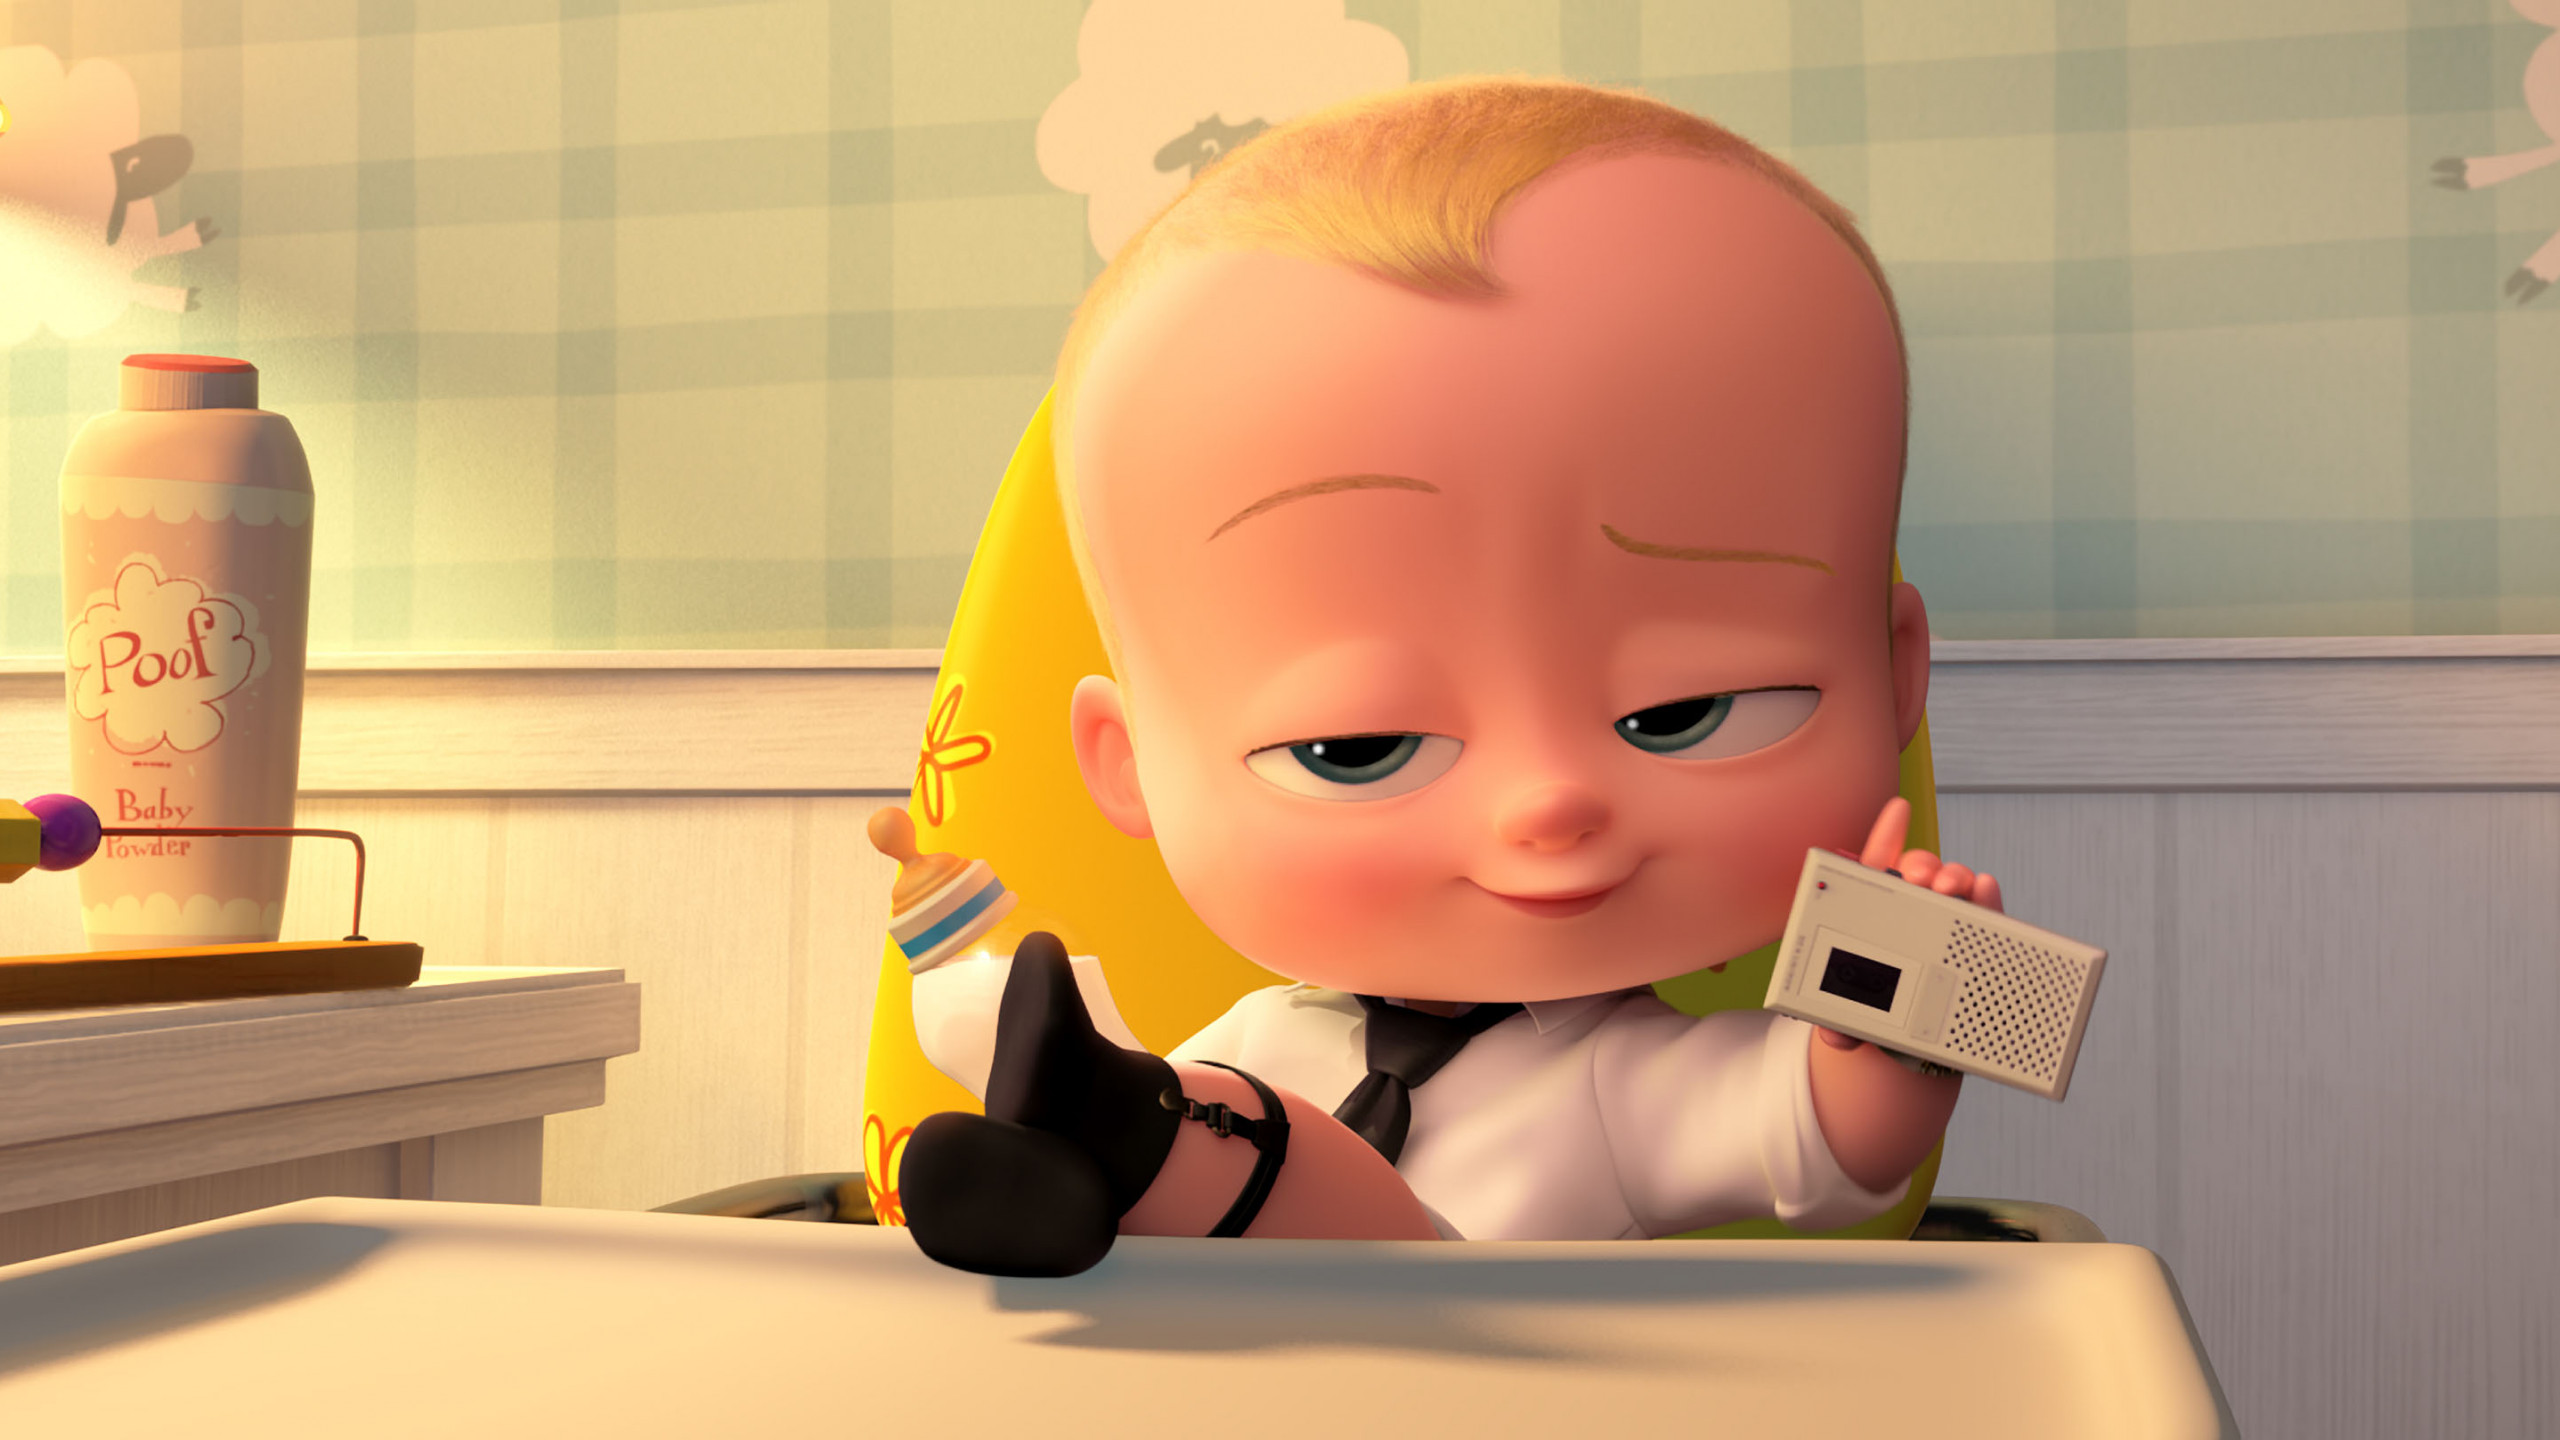 Wallpaper The Boss Baby, Baby, best animation movies, Movies #12265